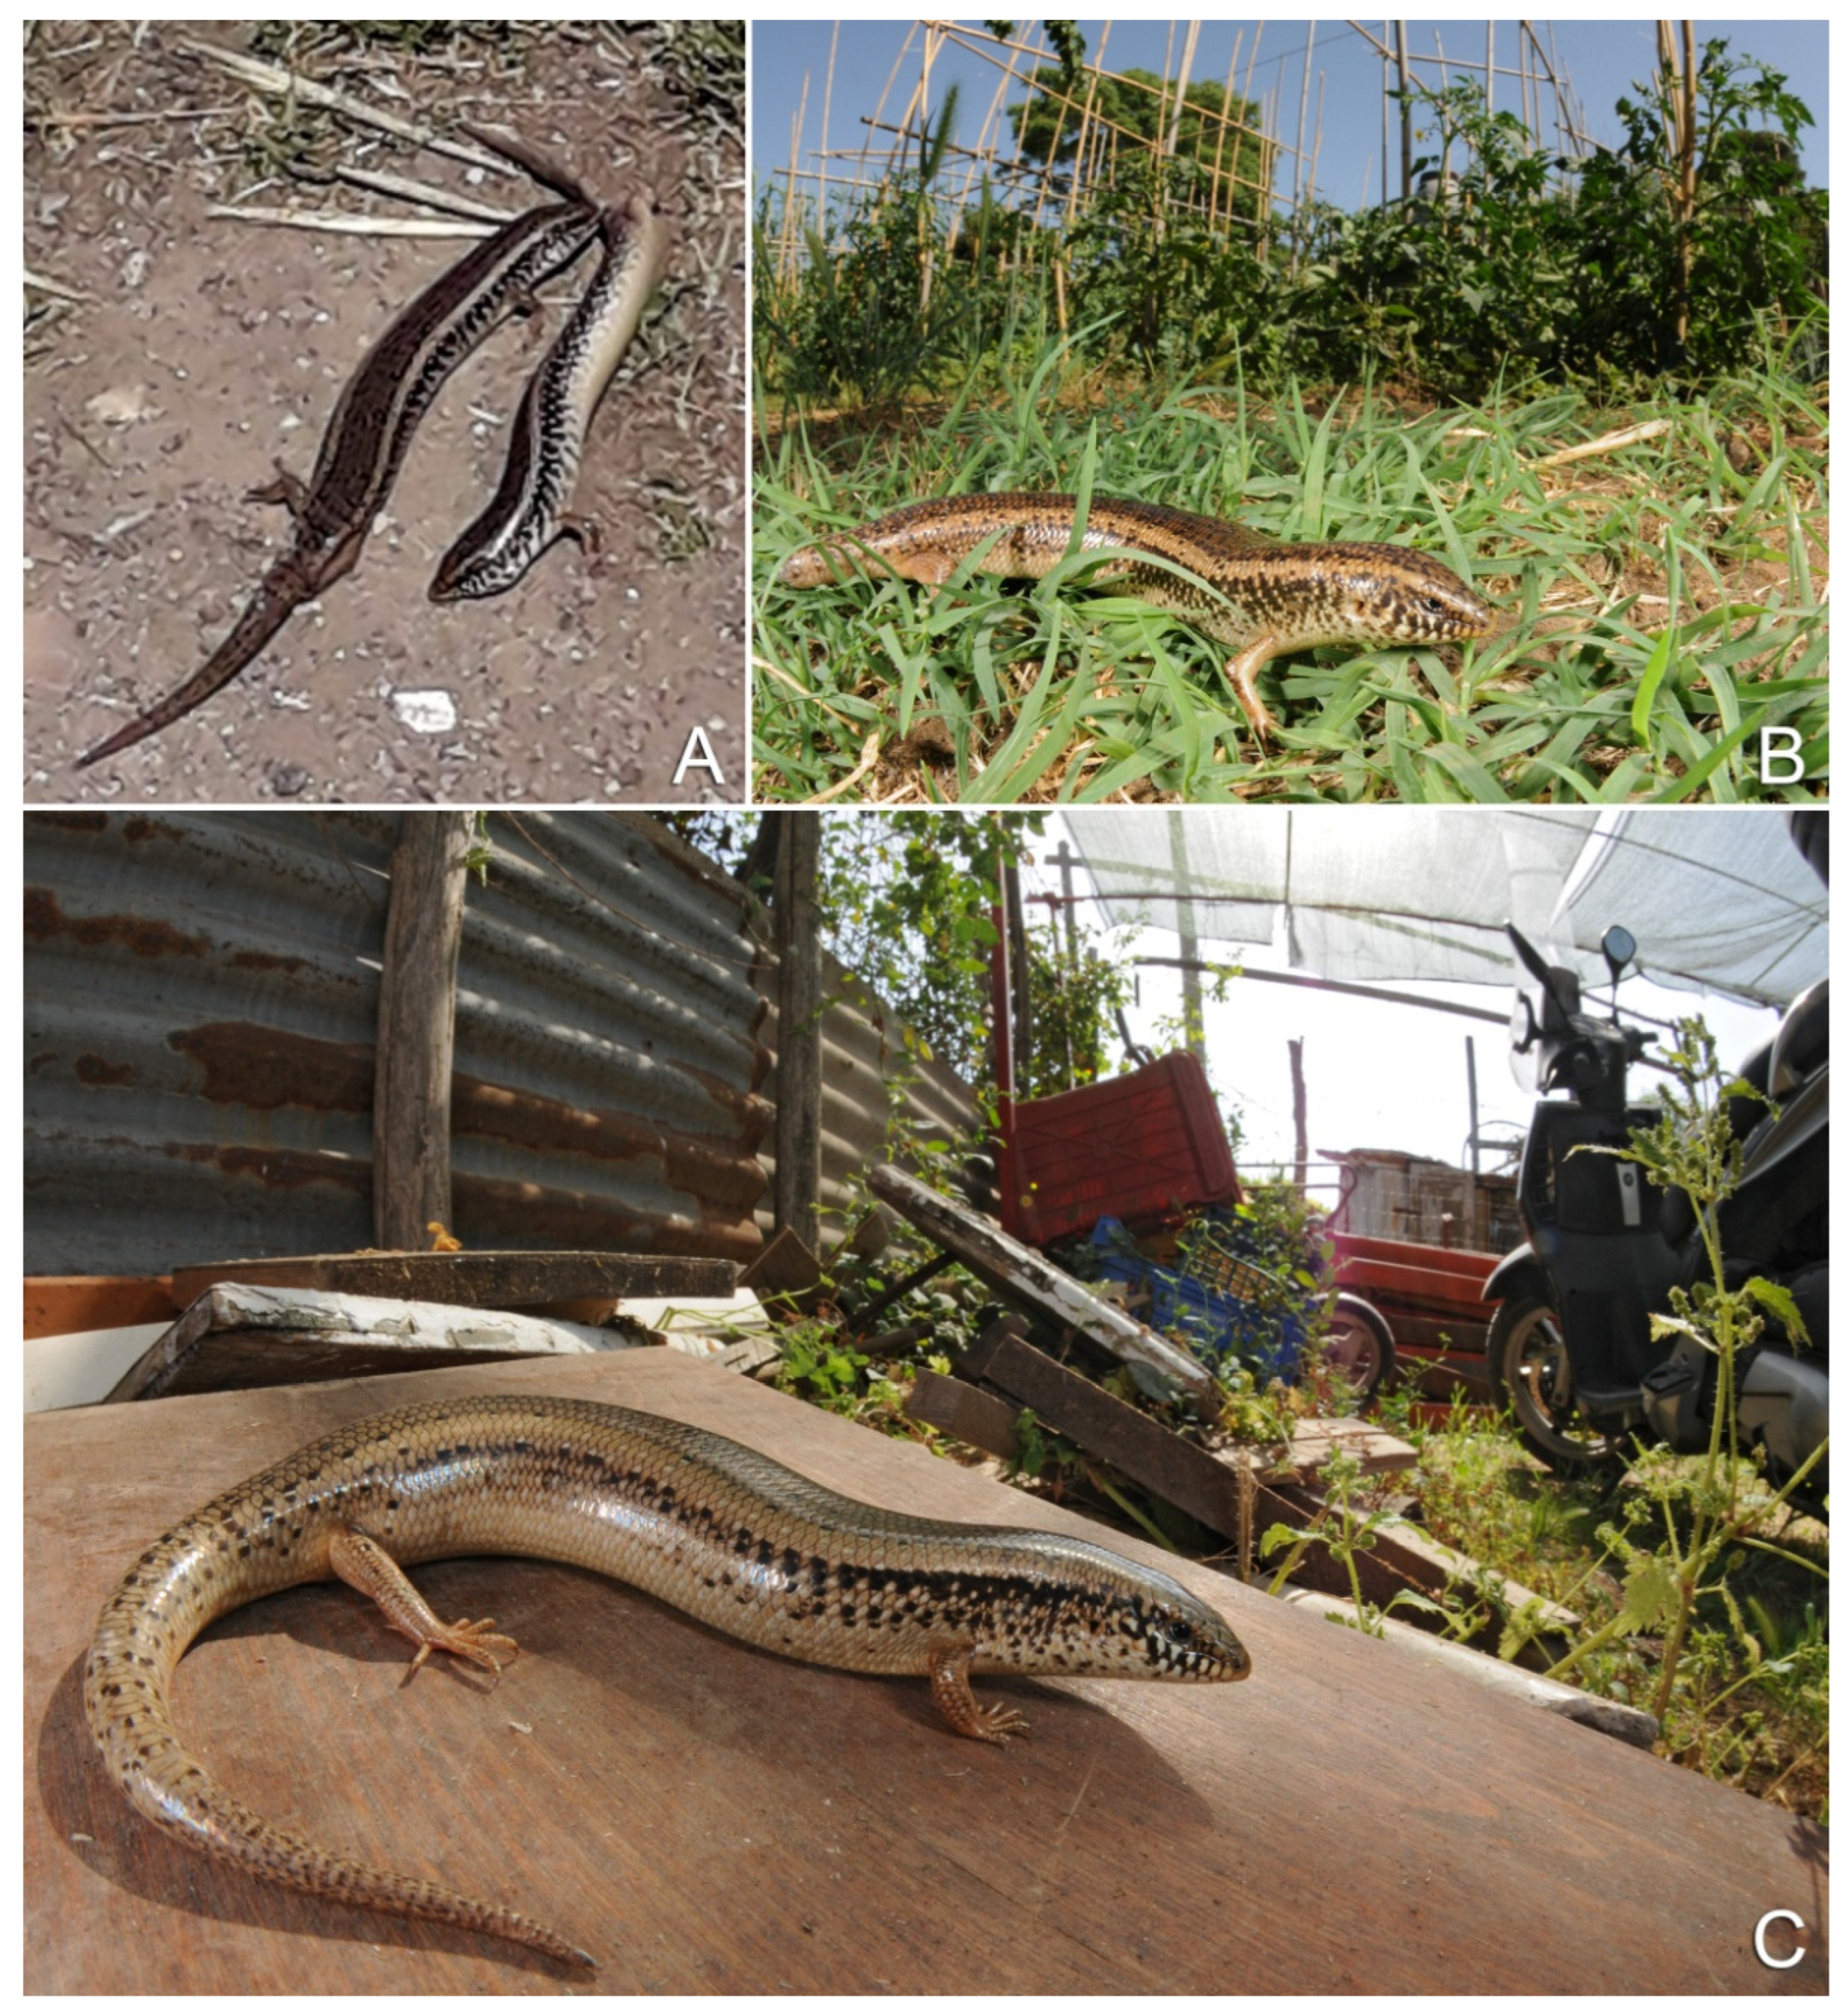 Animals | Free Full-Text | Aliens Coming by Ships: Distribution and Origins  of the Ocellated Skink Populations in Peninsular Italy